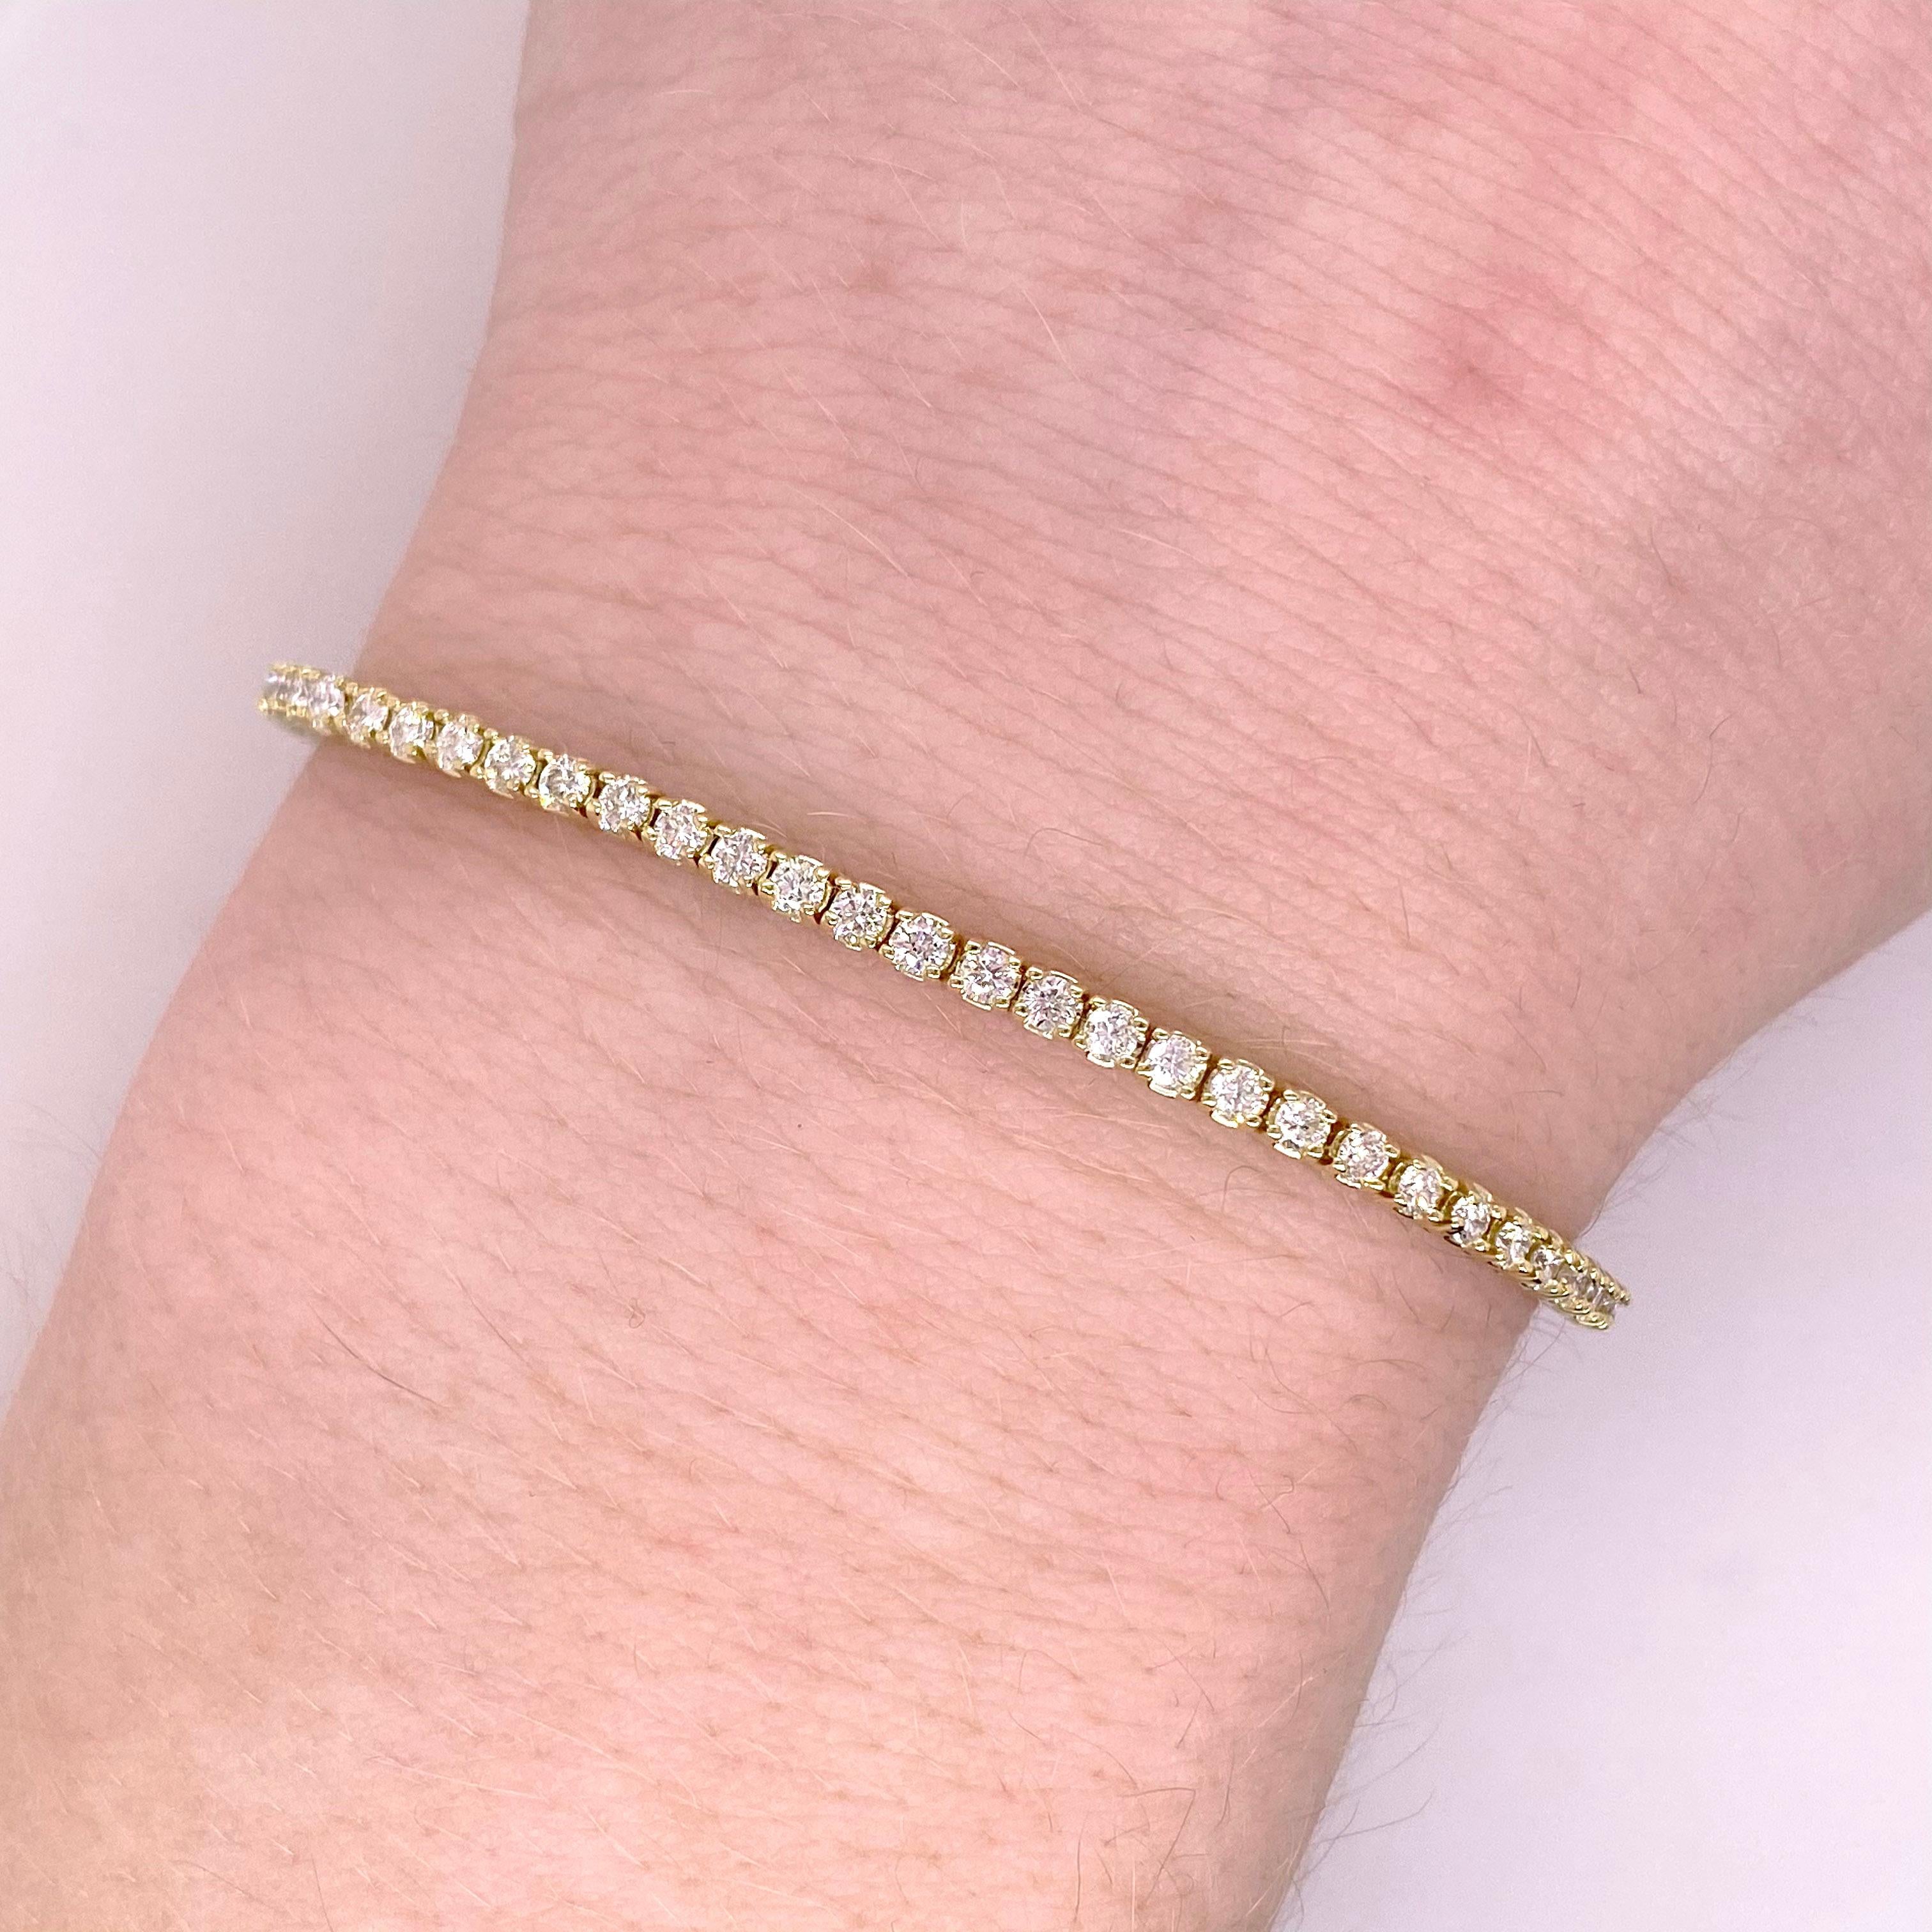 This 14 karat gold tennis bracelet has a total of 2 carats of diamonds! These are genuine diamonds and come with a certificate of authenticity and appraisal. The bracelet is 7 inches long but can be altered to a different length if ever needed..